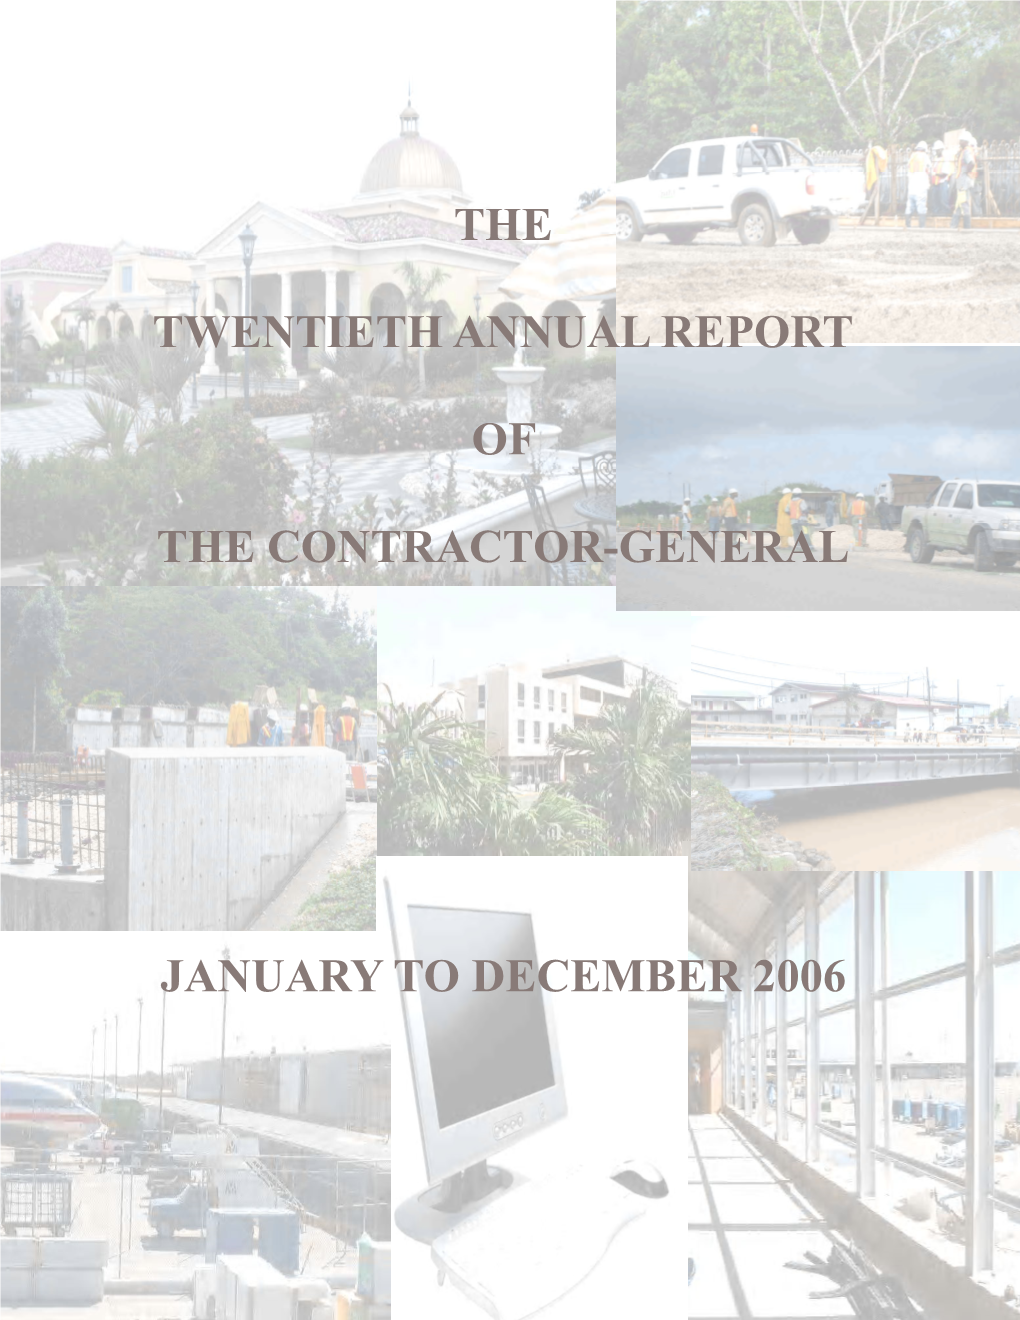 The Twentieth Annual Report of the Contractor-General